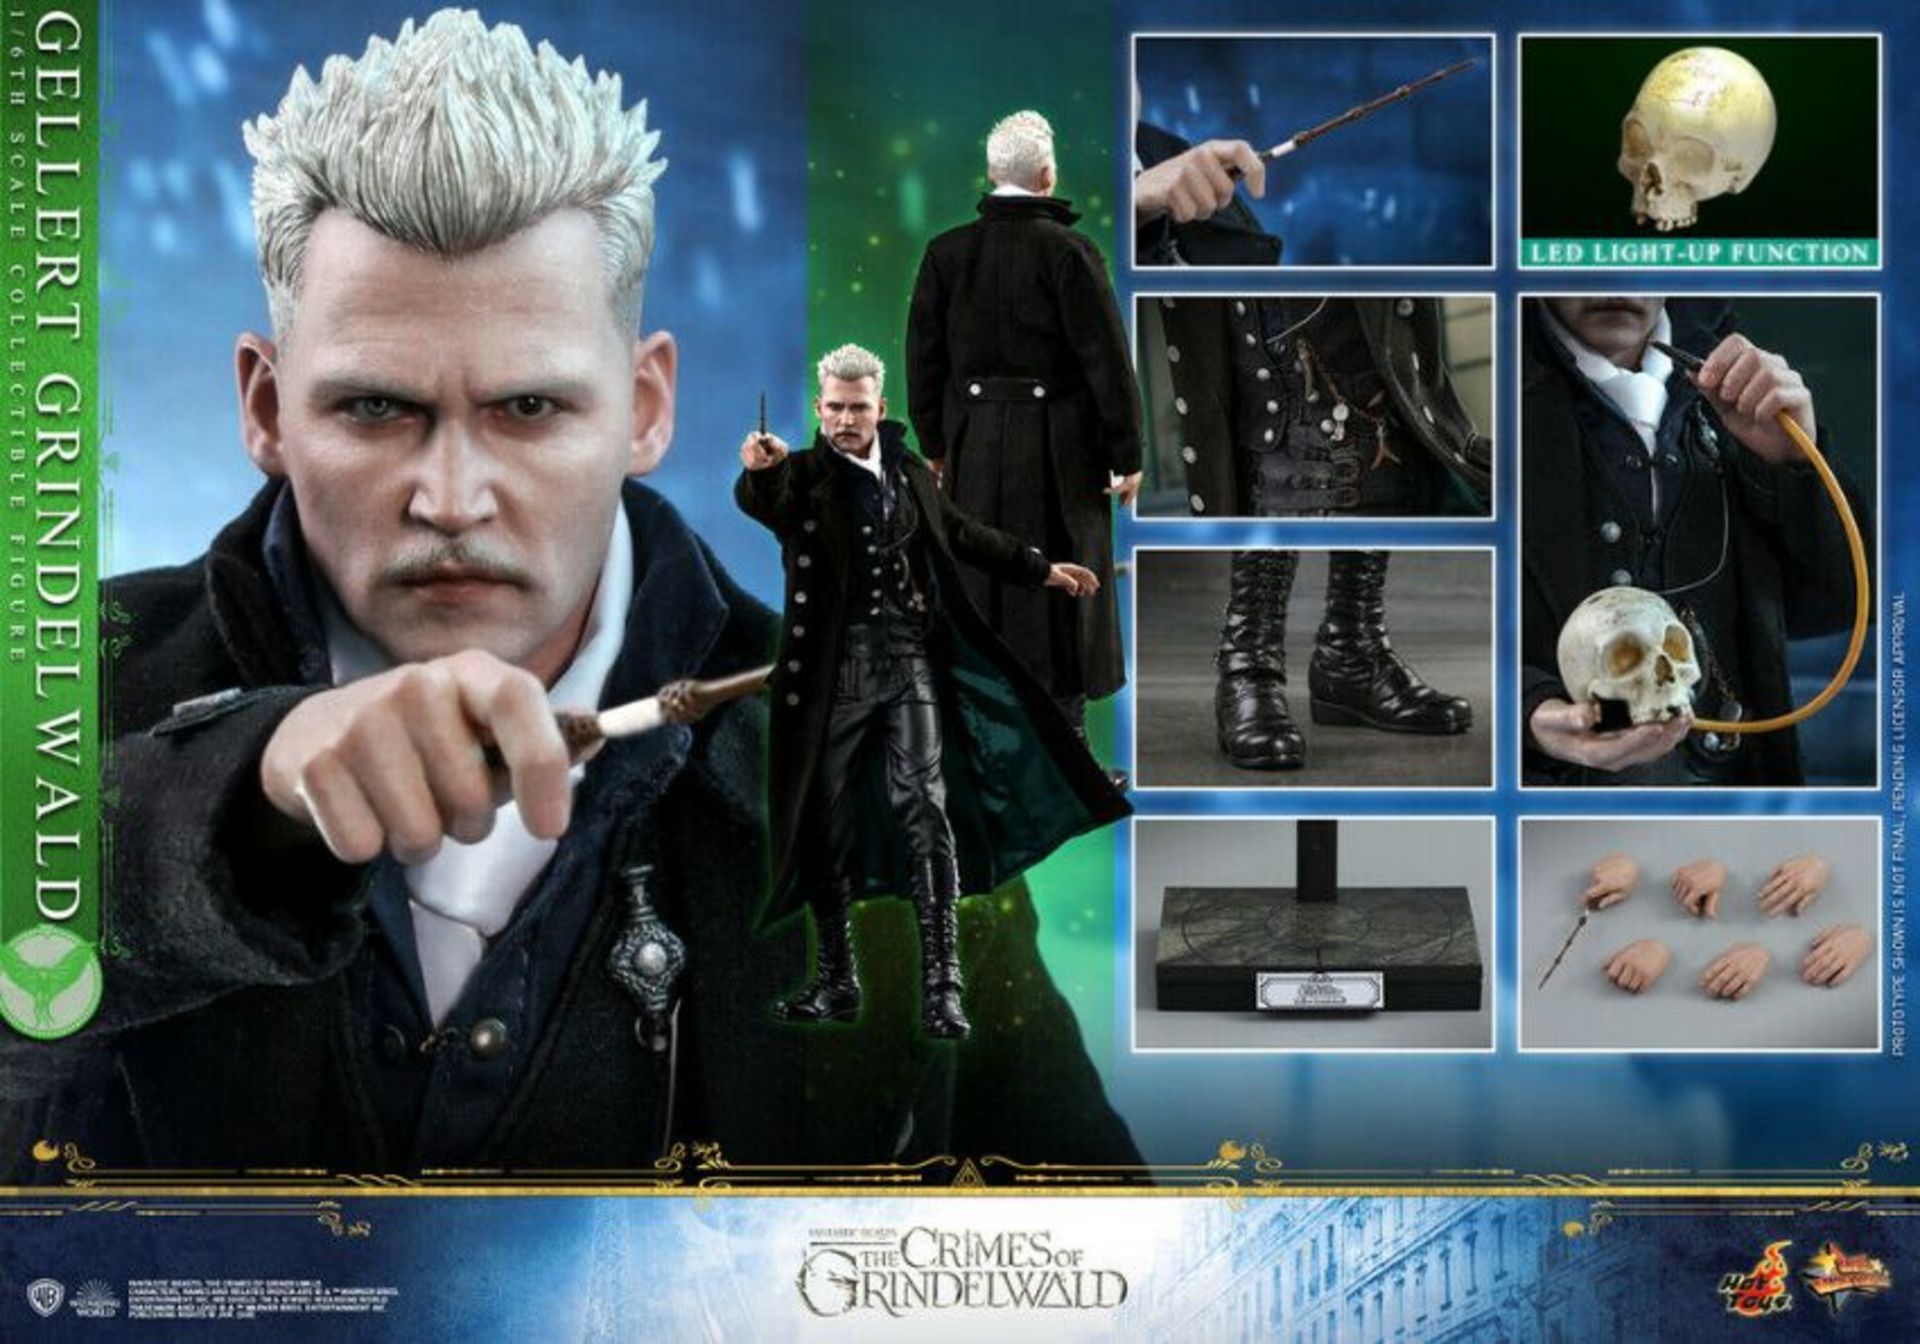 1 x Hot Toys Fantastic Beasts Gellert Grindelwald Special Edition 1/6 Scale Figurine - MMS513 - - Image 4 of 4